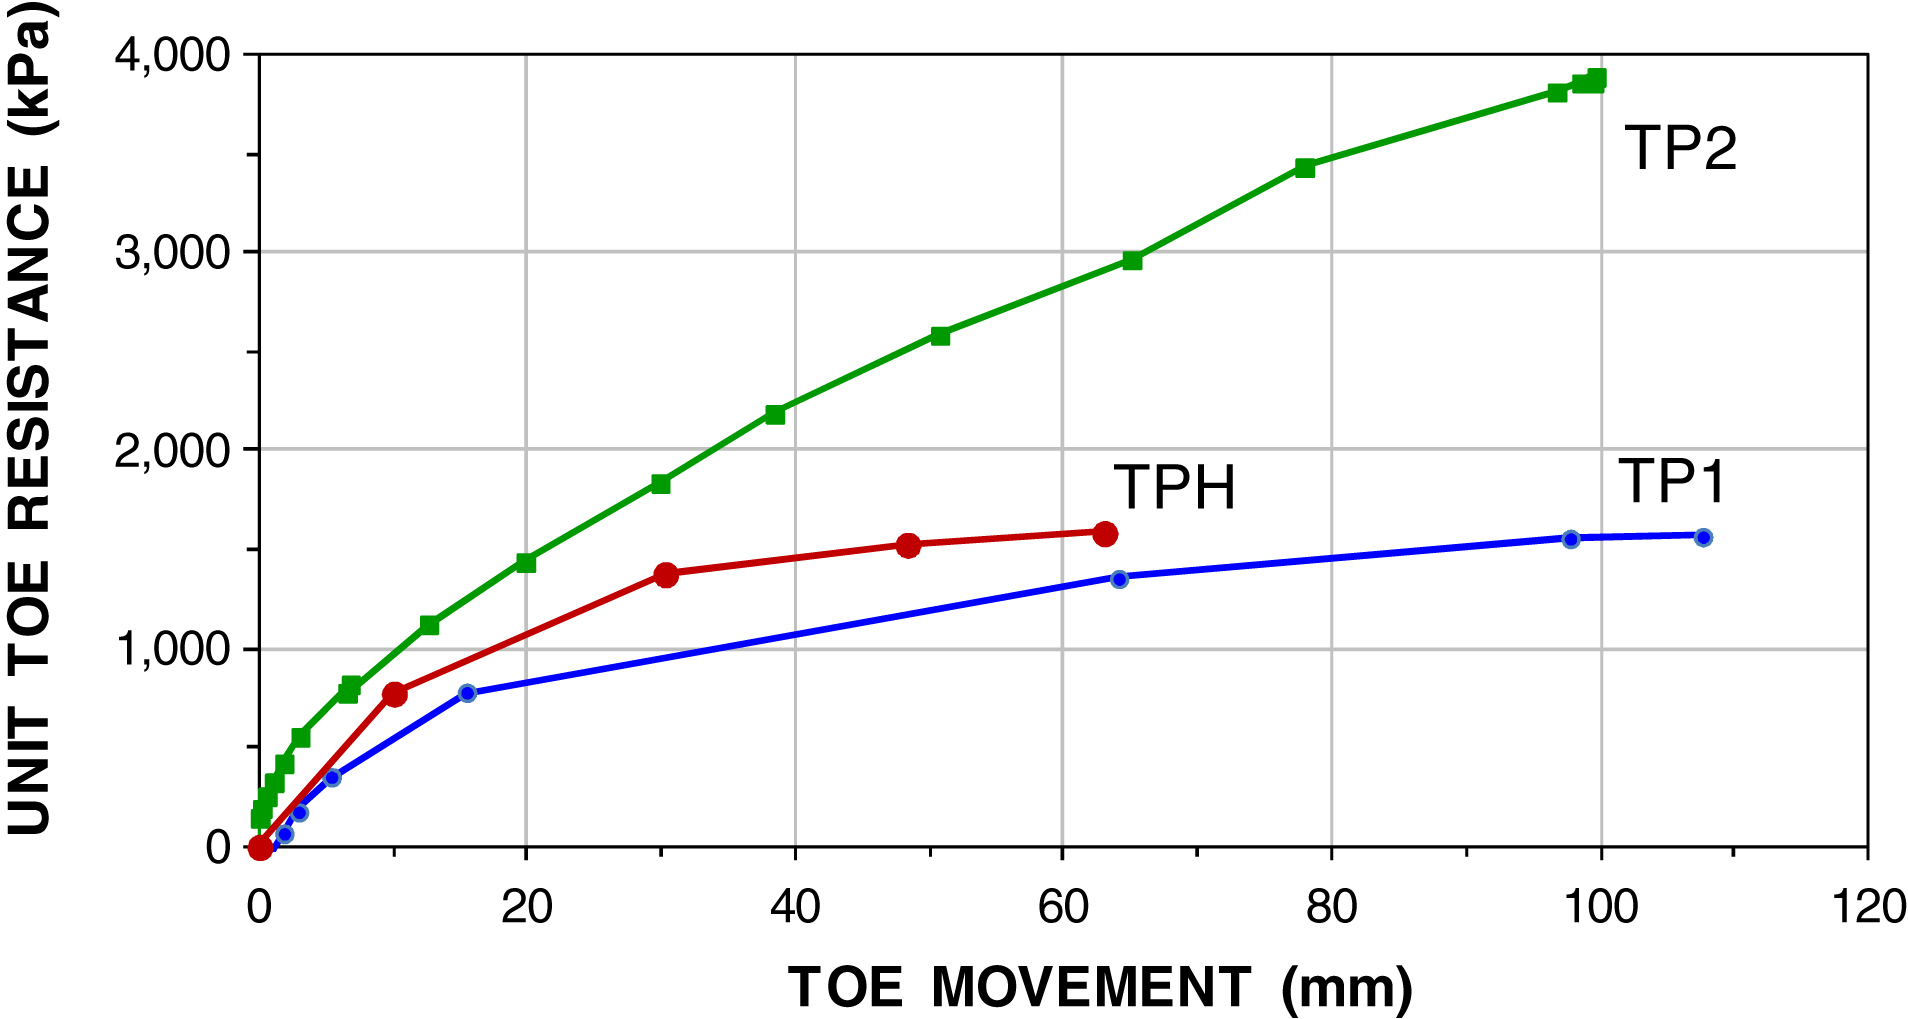 Toe stress versus toe movement for Piles TP1, TP2, and TPH.